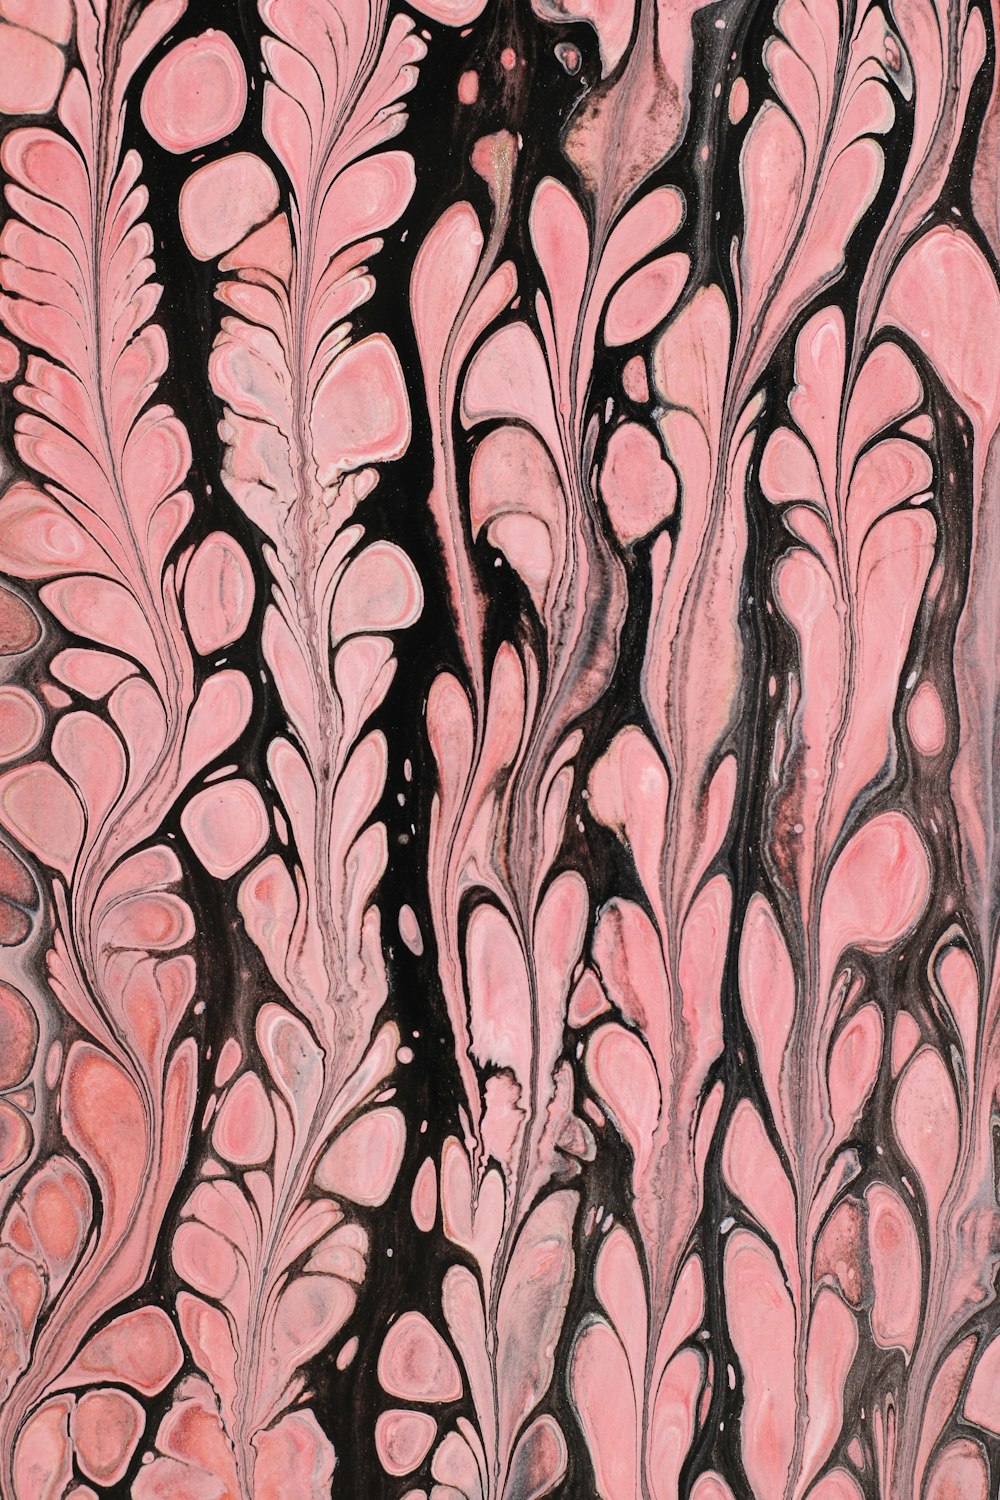 a painting of pink and black leaves on a white background